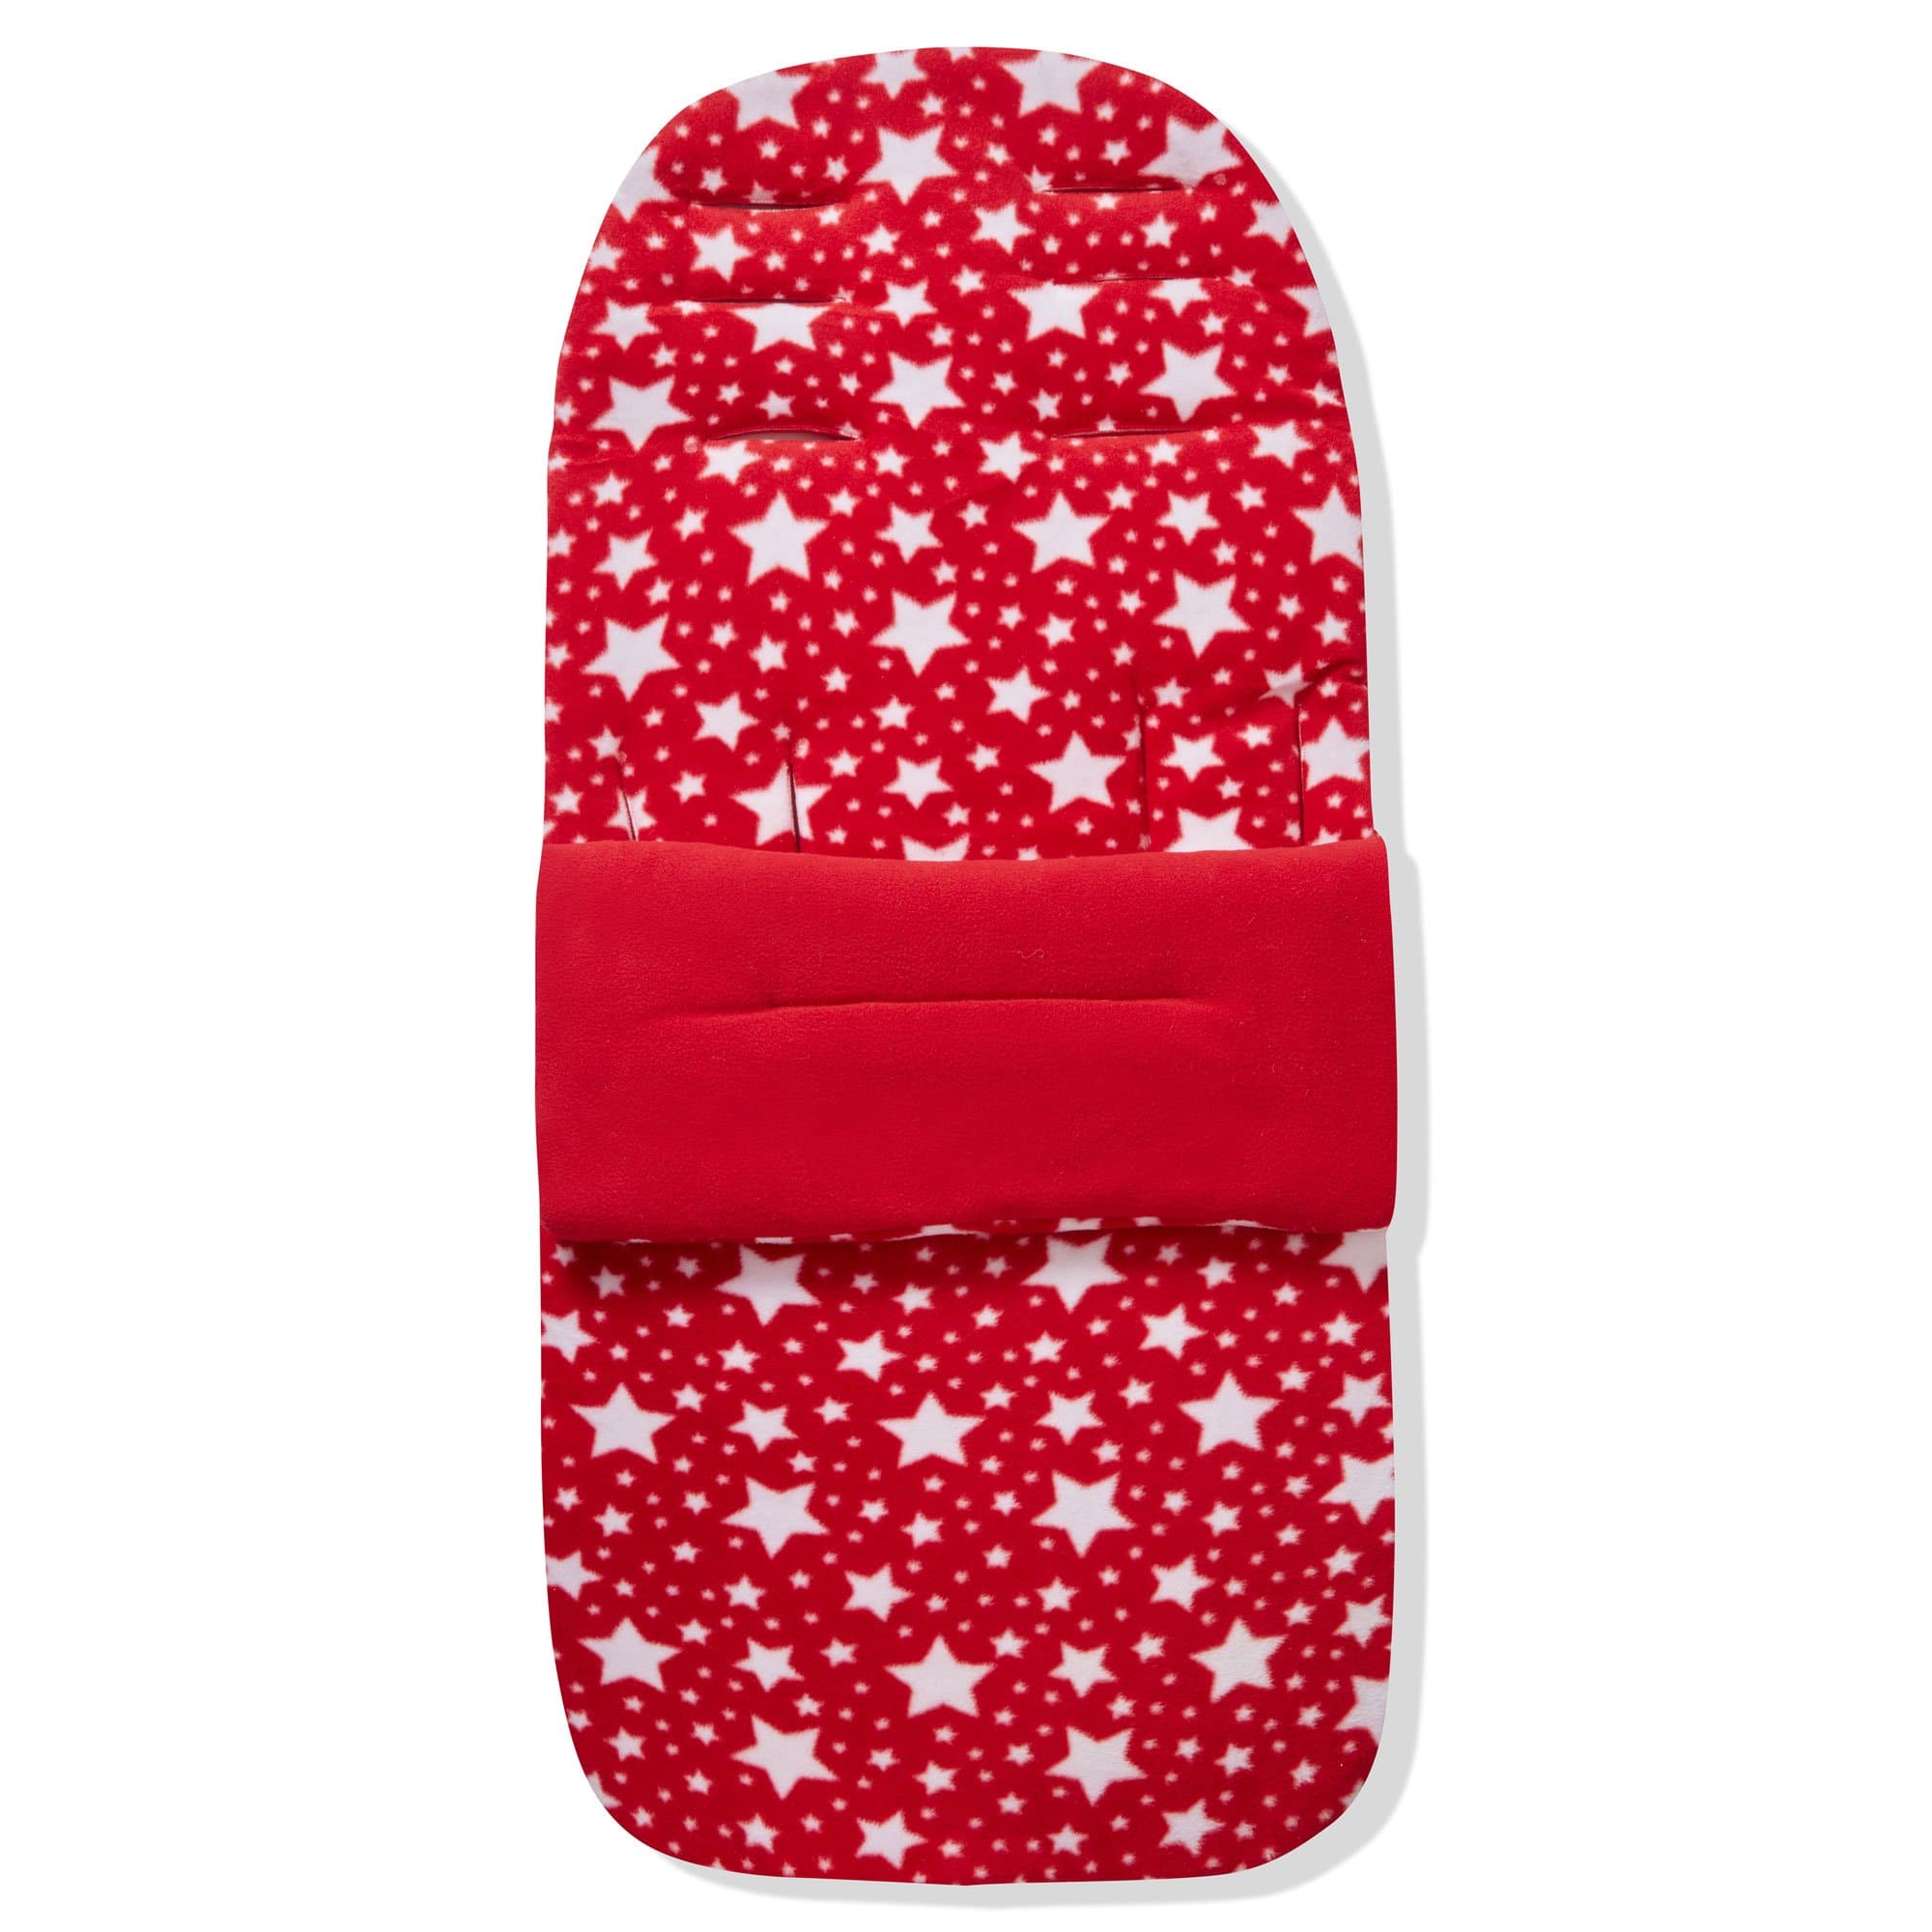 Fleece Footmuff / Cosy Toes Compatible with Babyzen - Red Star / Fits All Models | For Your Little One